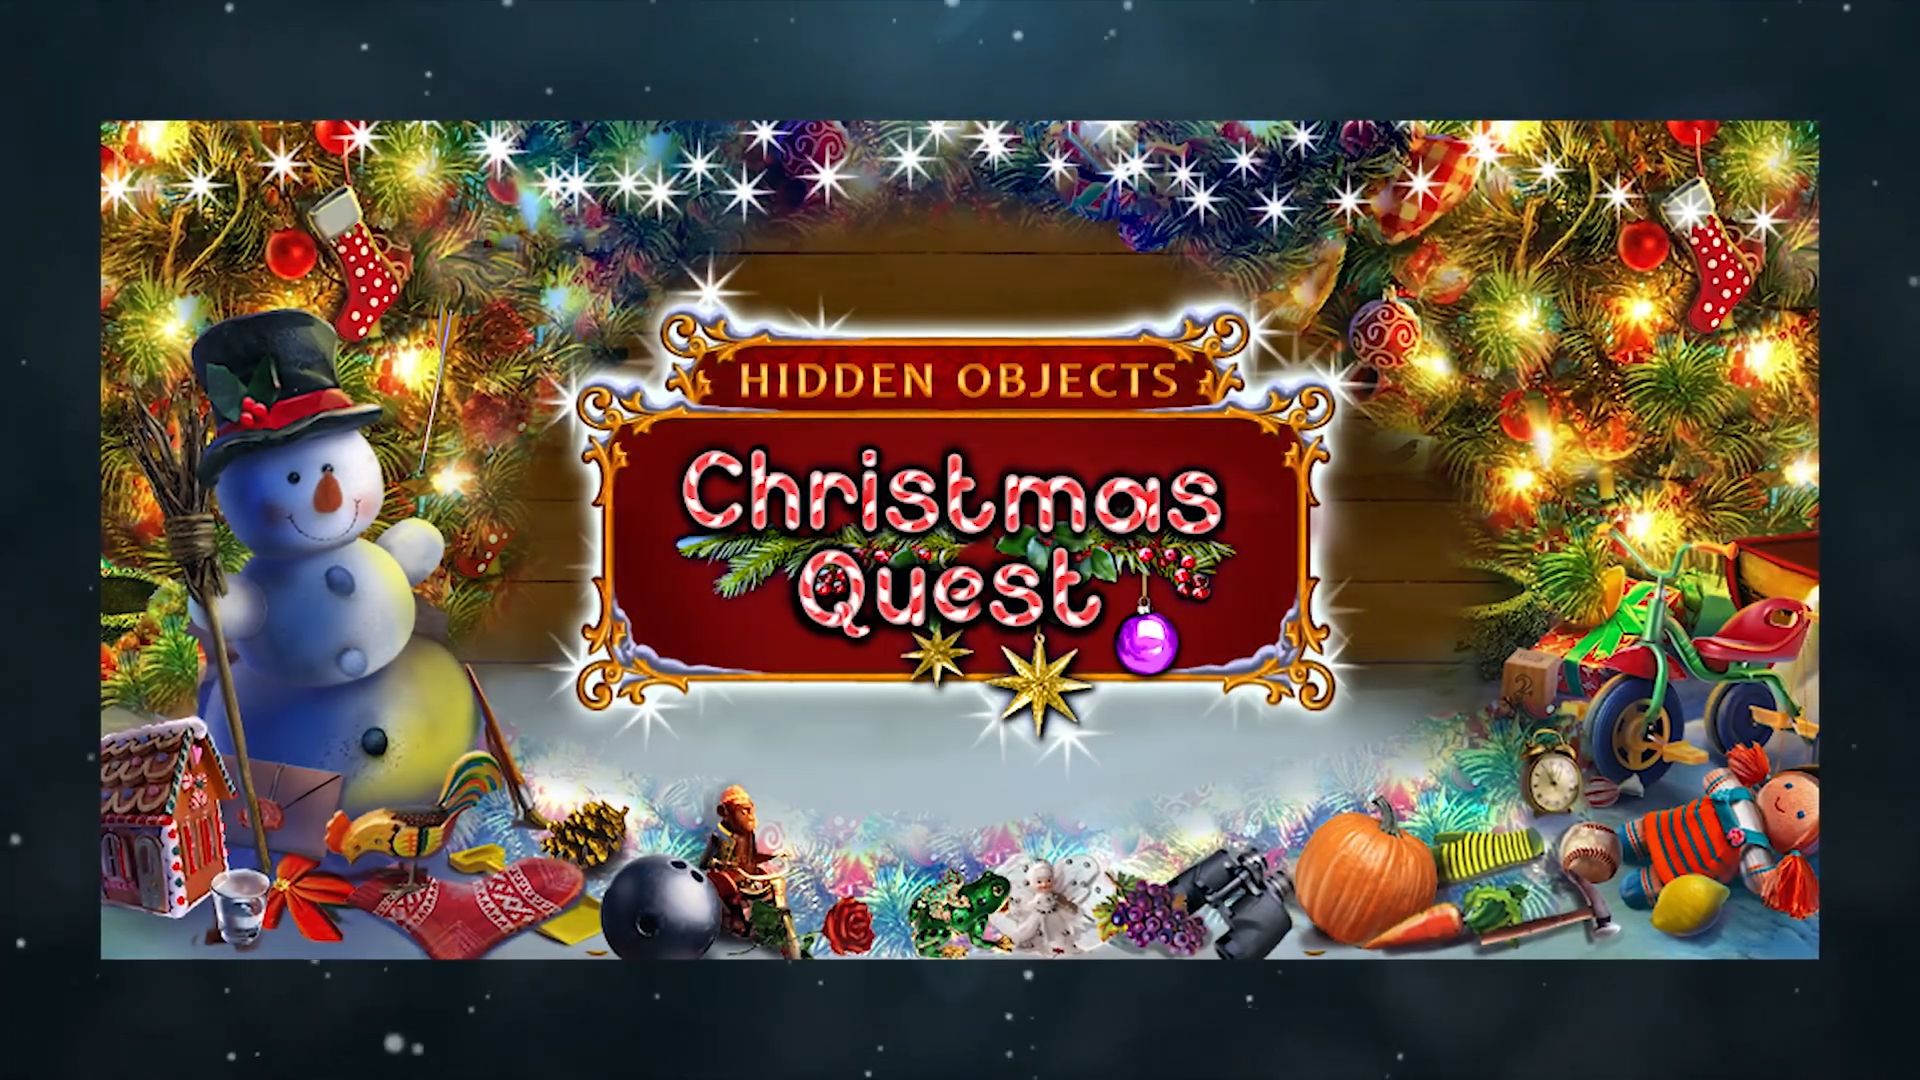 Full version of Android Hidden objects game apk Hidden Objects: Christmas Quest for tablet and phone.